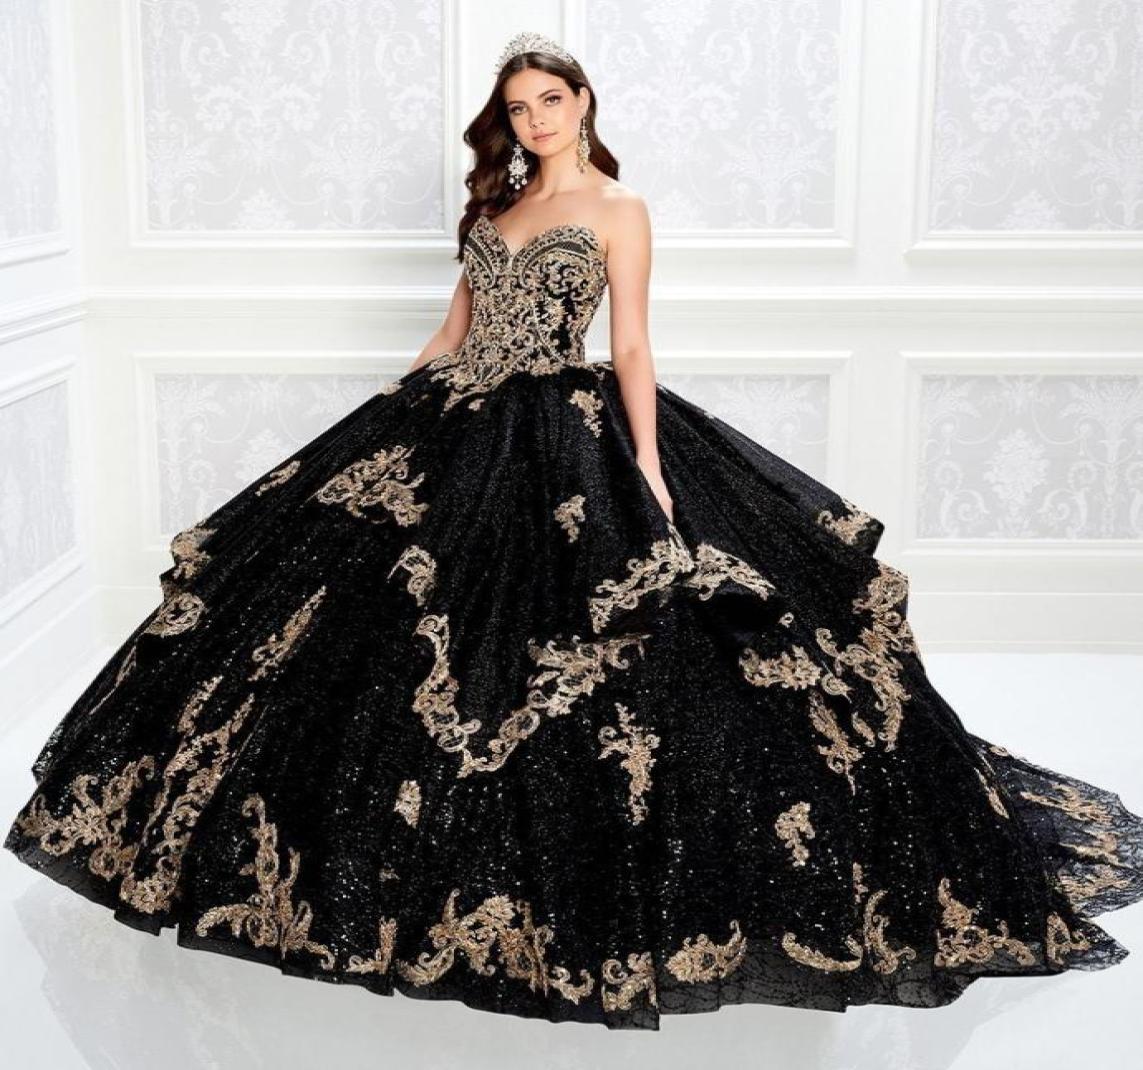 

Shining Black Beaded Ball Gown Quinceanera Dresses Sweetheart Neck Lace Appliqued Prom Gowns Sequined Sweep Train Tulle Sweet 15 D9863558, Light sky blue